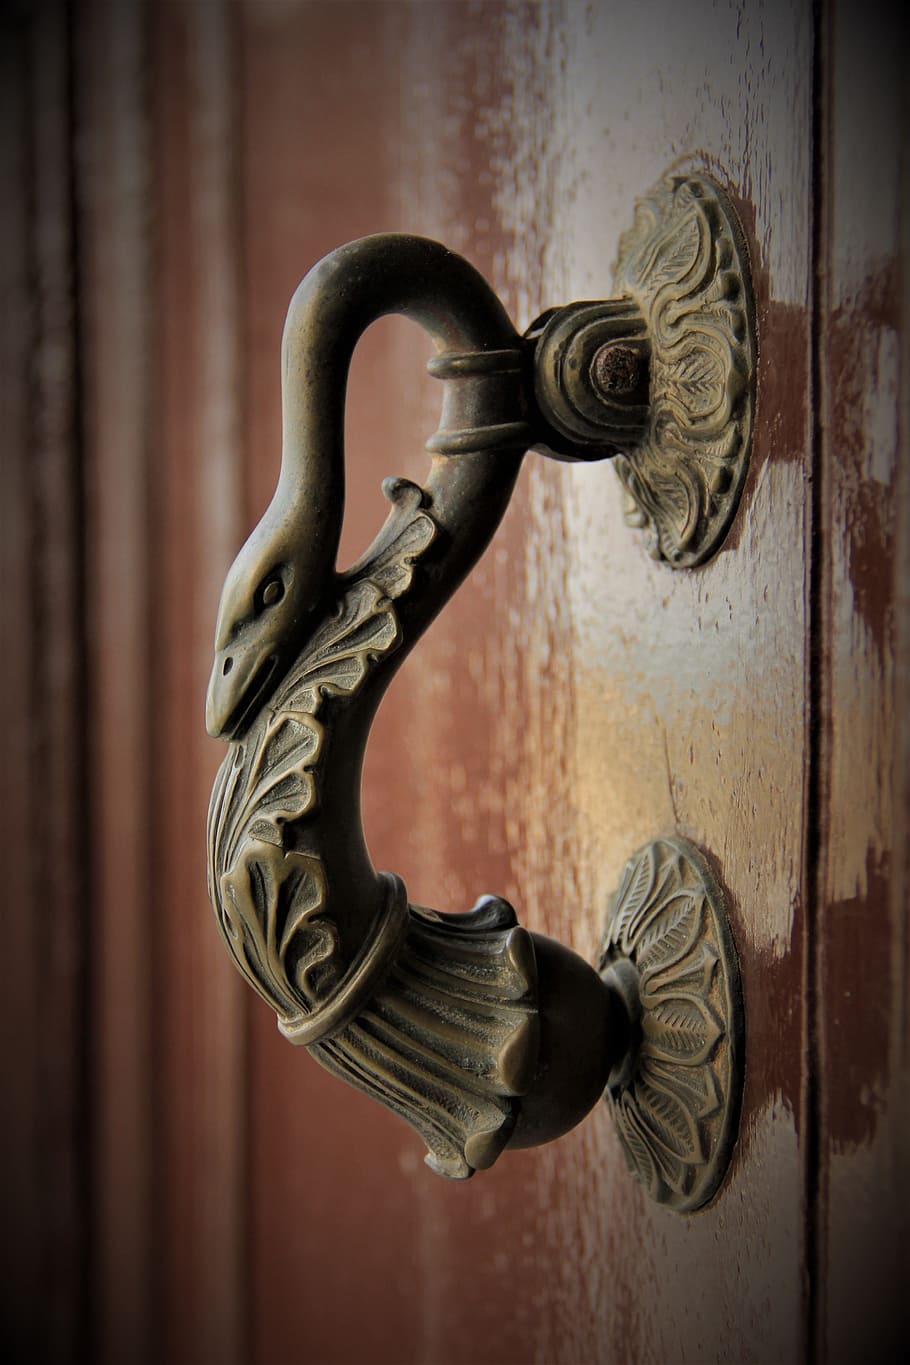 old door, old, input, door, entrance, safety, security, protection, knob, metal